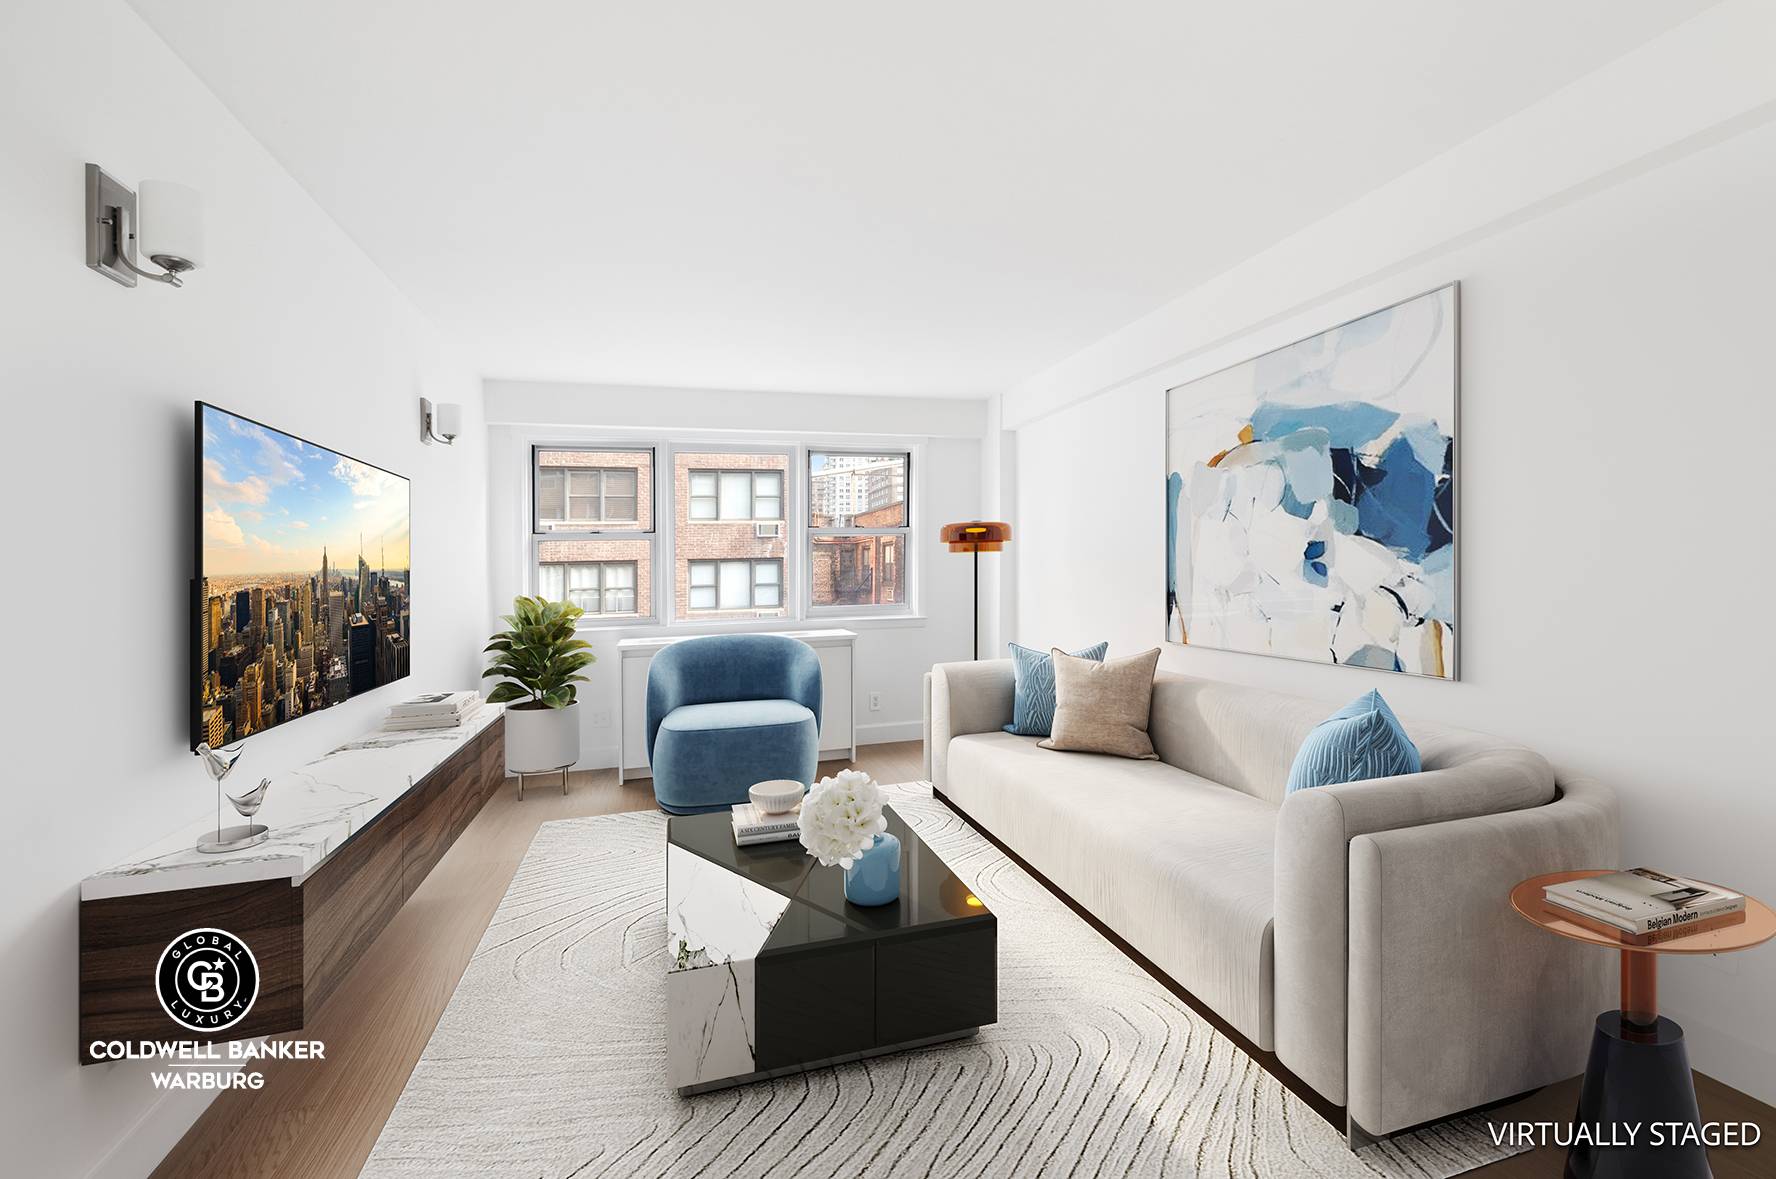 No Board approval is required for this brand newly renovated one bedroom unit in the Townsley, a full service cooperative building in Murray Hill.